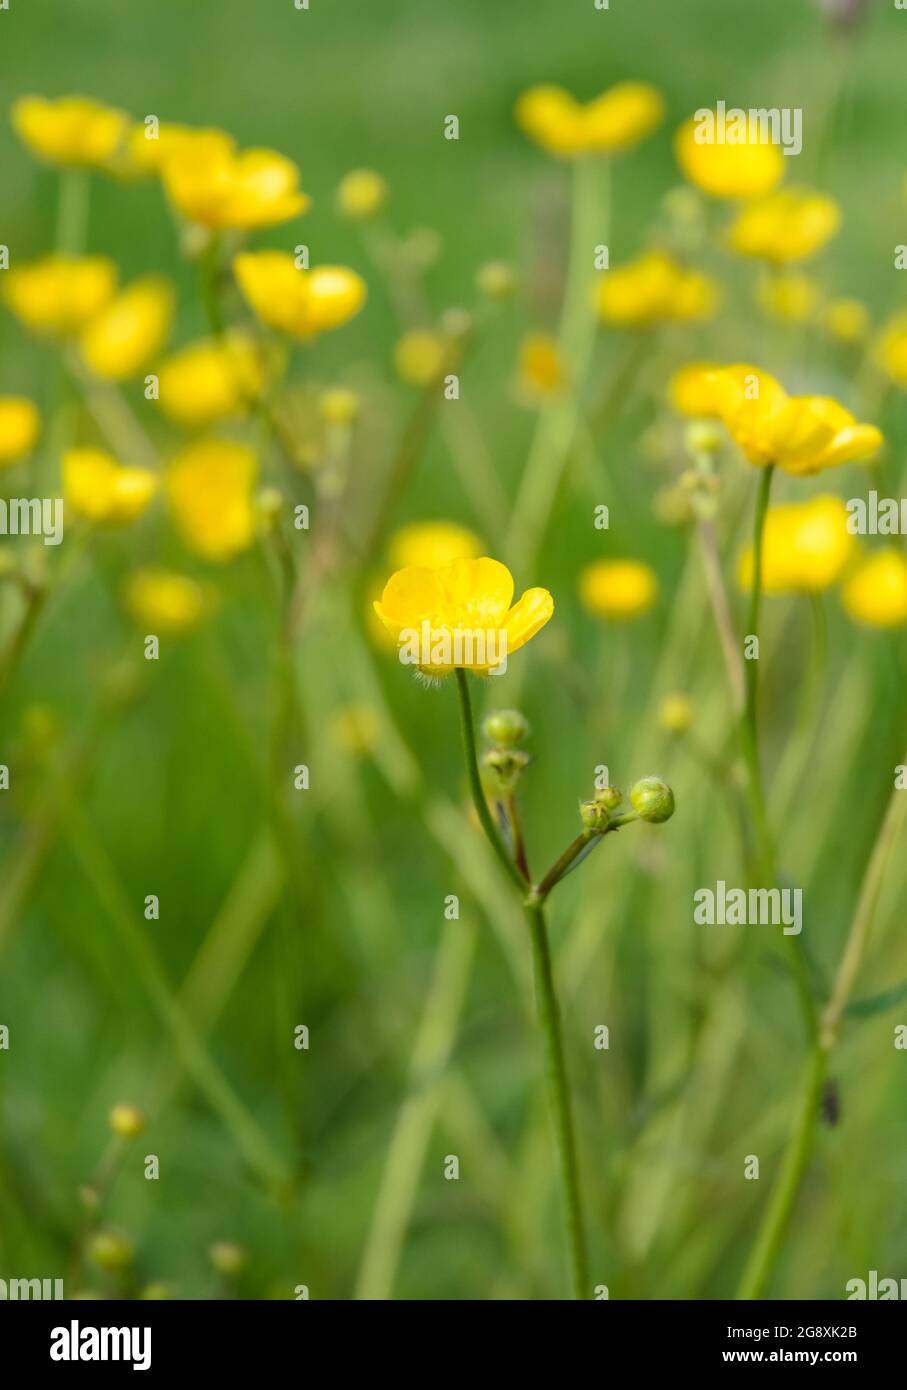 Ranunculus acris, yellow buttercup flower, known as buttercups, spearworts and water crowfoots in the countryside in Germany, Europe Stock Photo